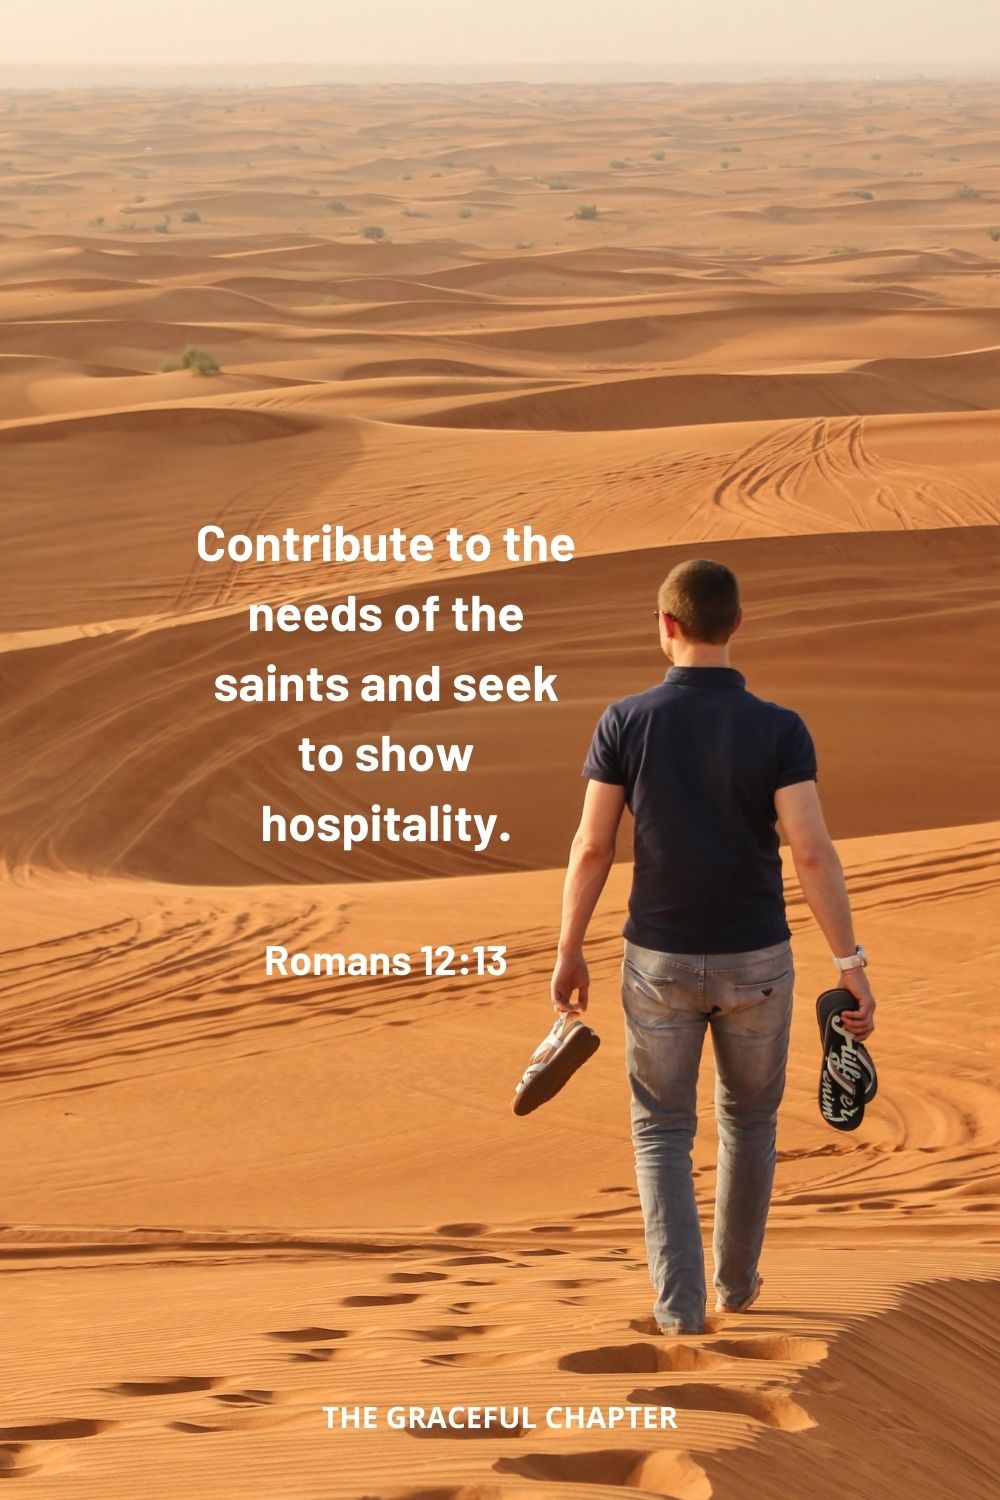 Contribute to the needs of the saints and seek to show hospitality. Romans 12:13